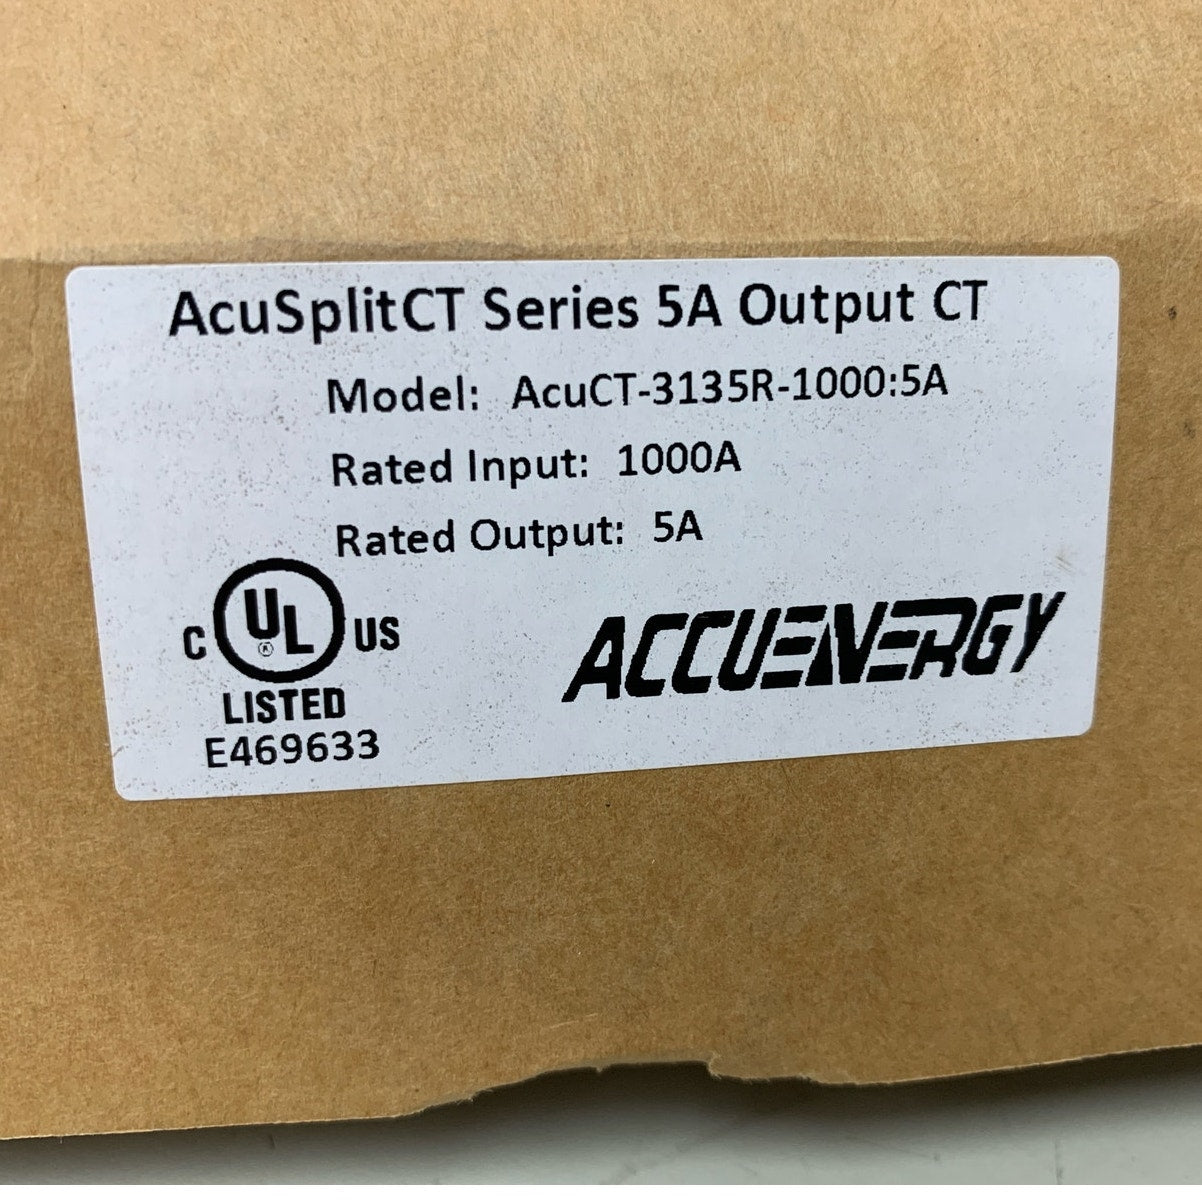 New In Box Accuenergy AccuSplitCT Series 5A 1000A Output Solar Panel CT